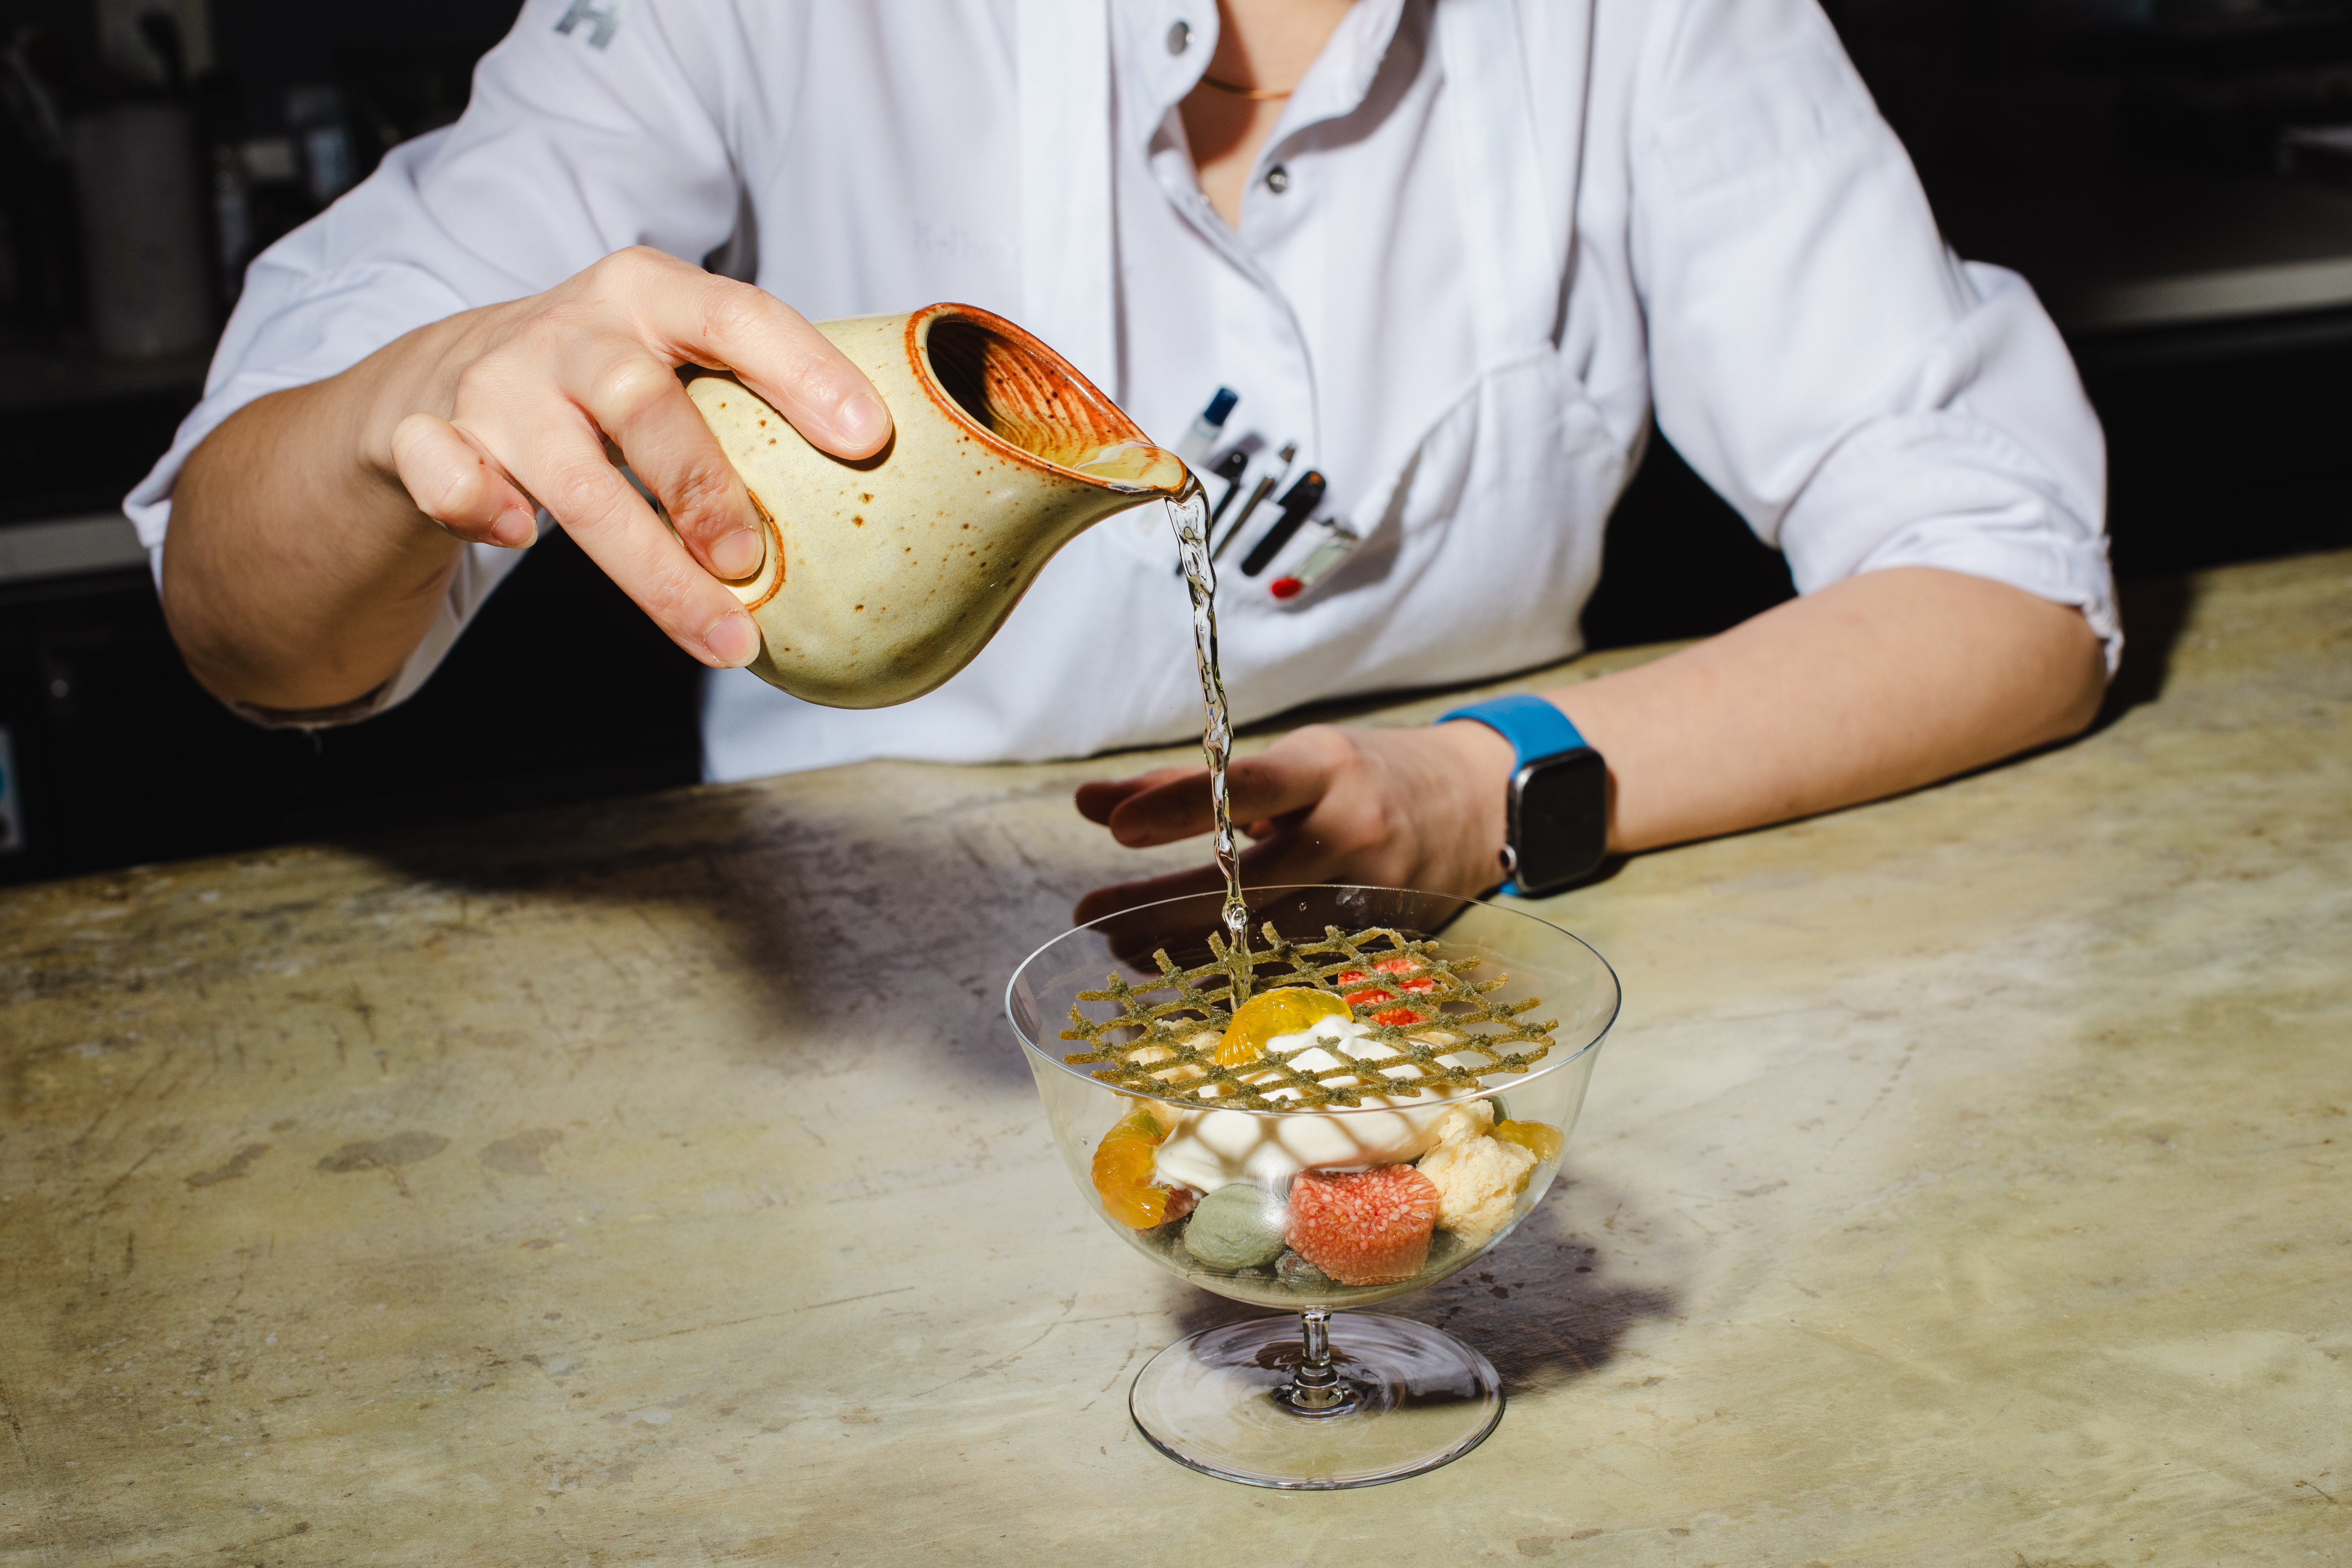 A person pours a pitcher into an elegantly arranged bowl of dessert